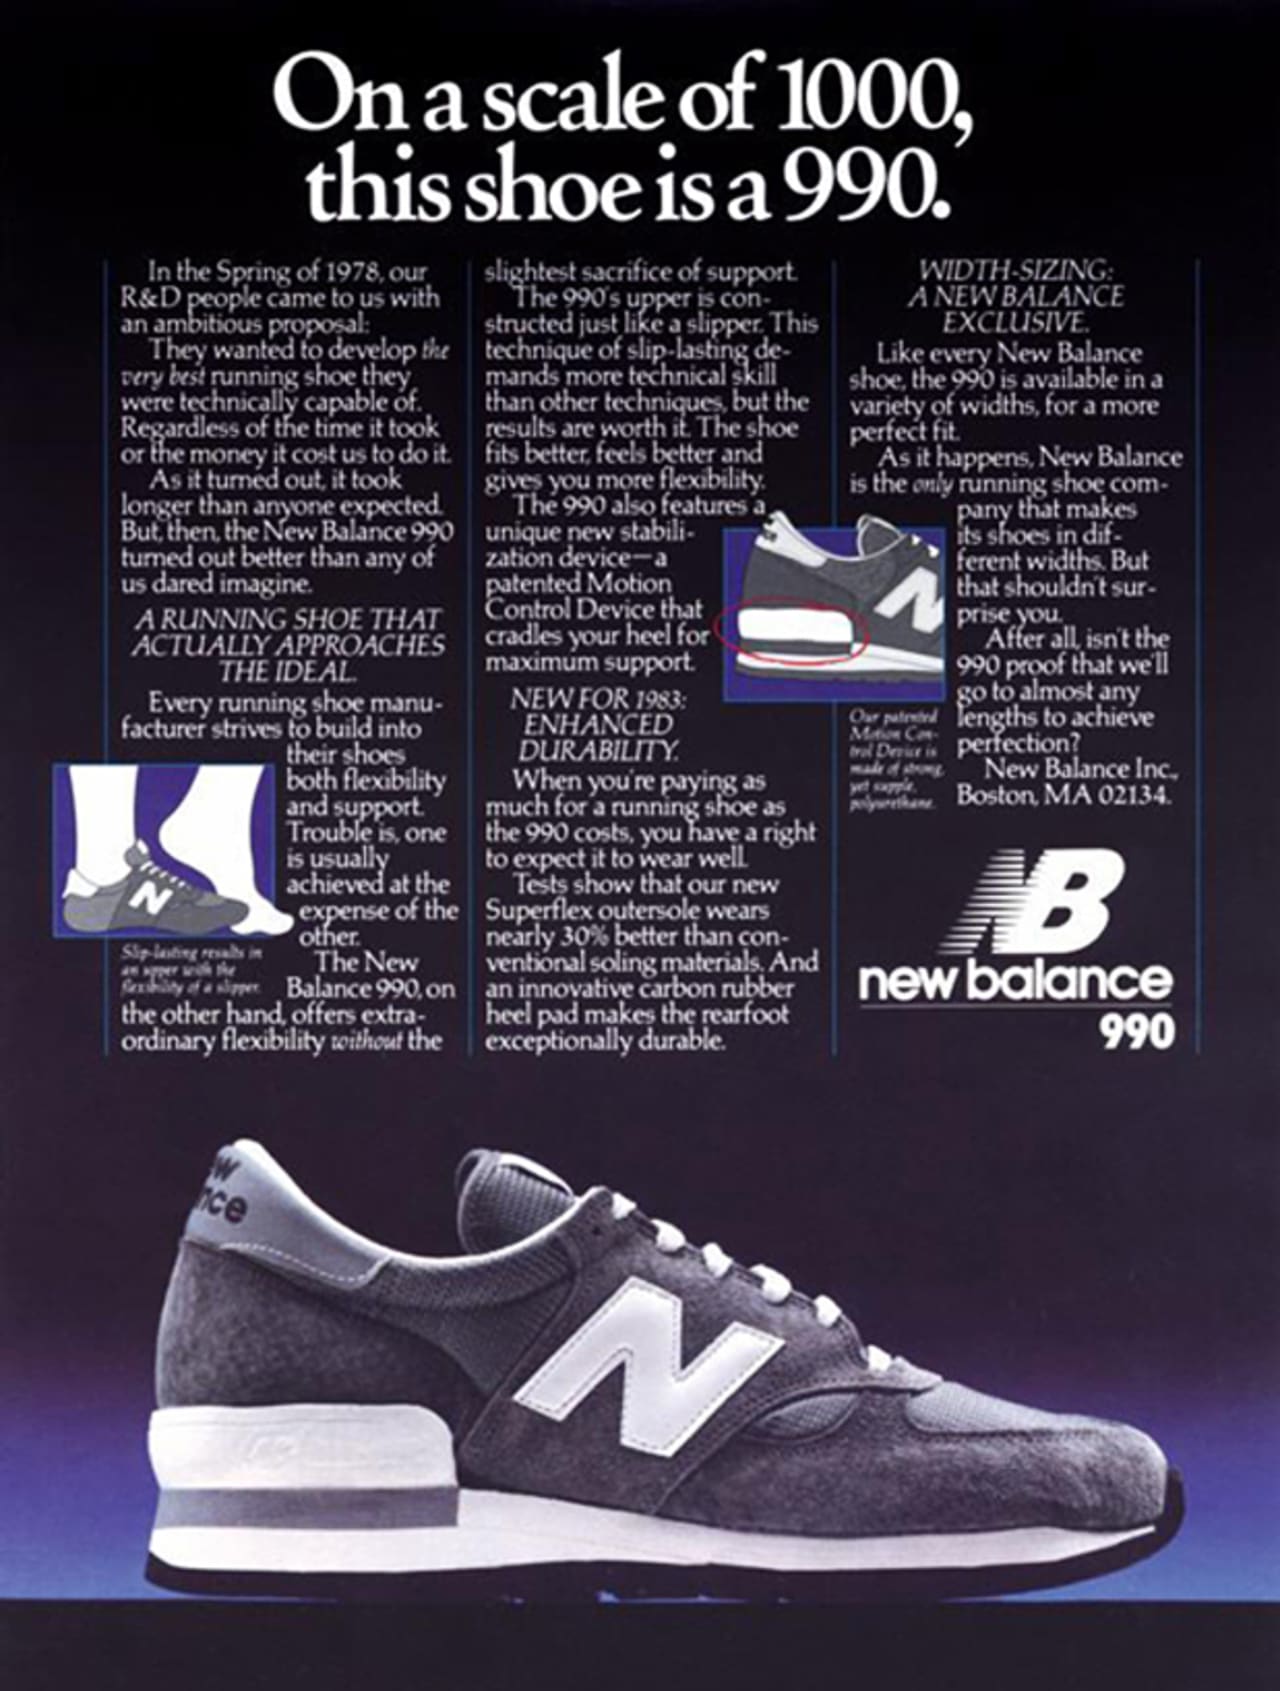 first new balance shoes ever made